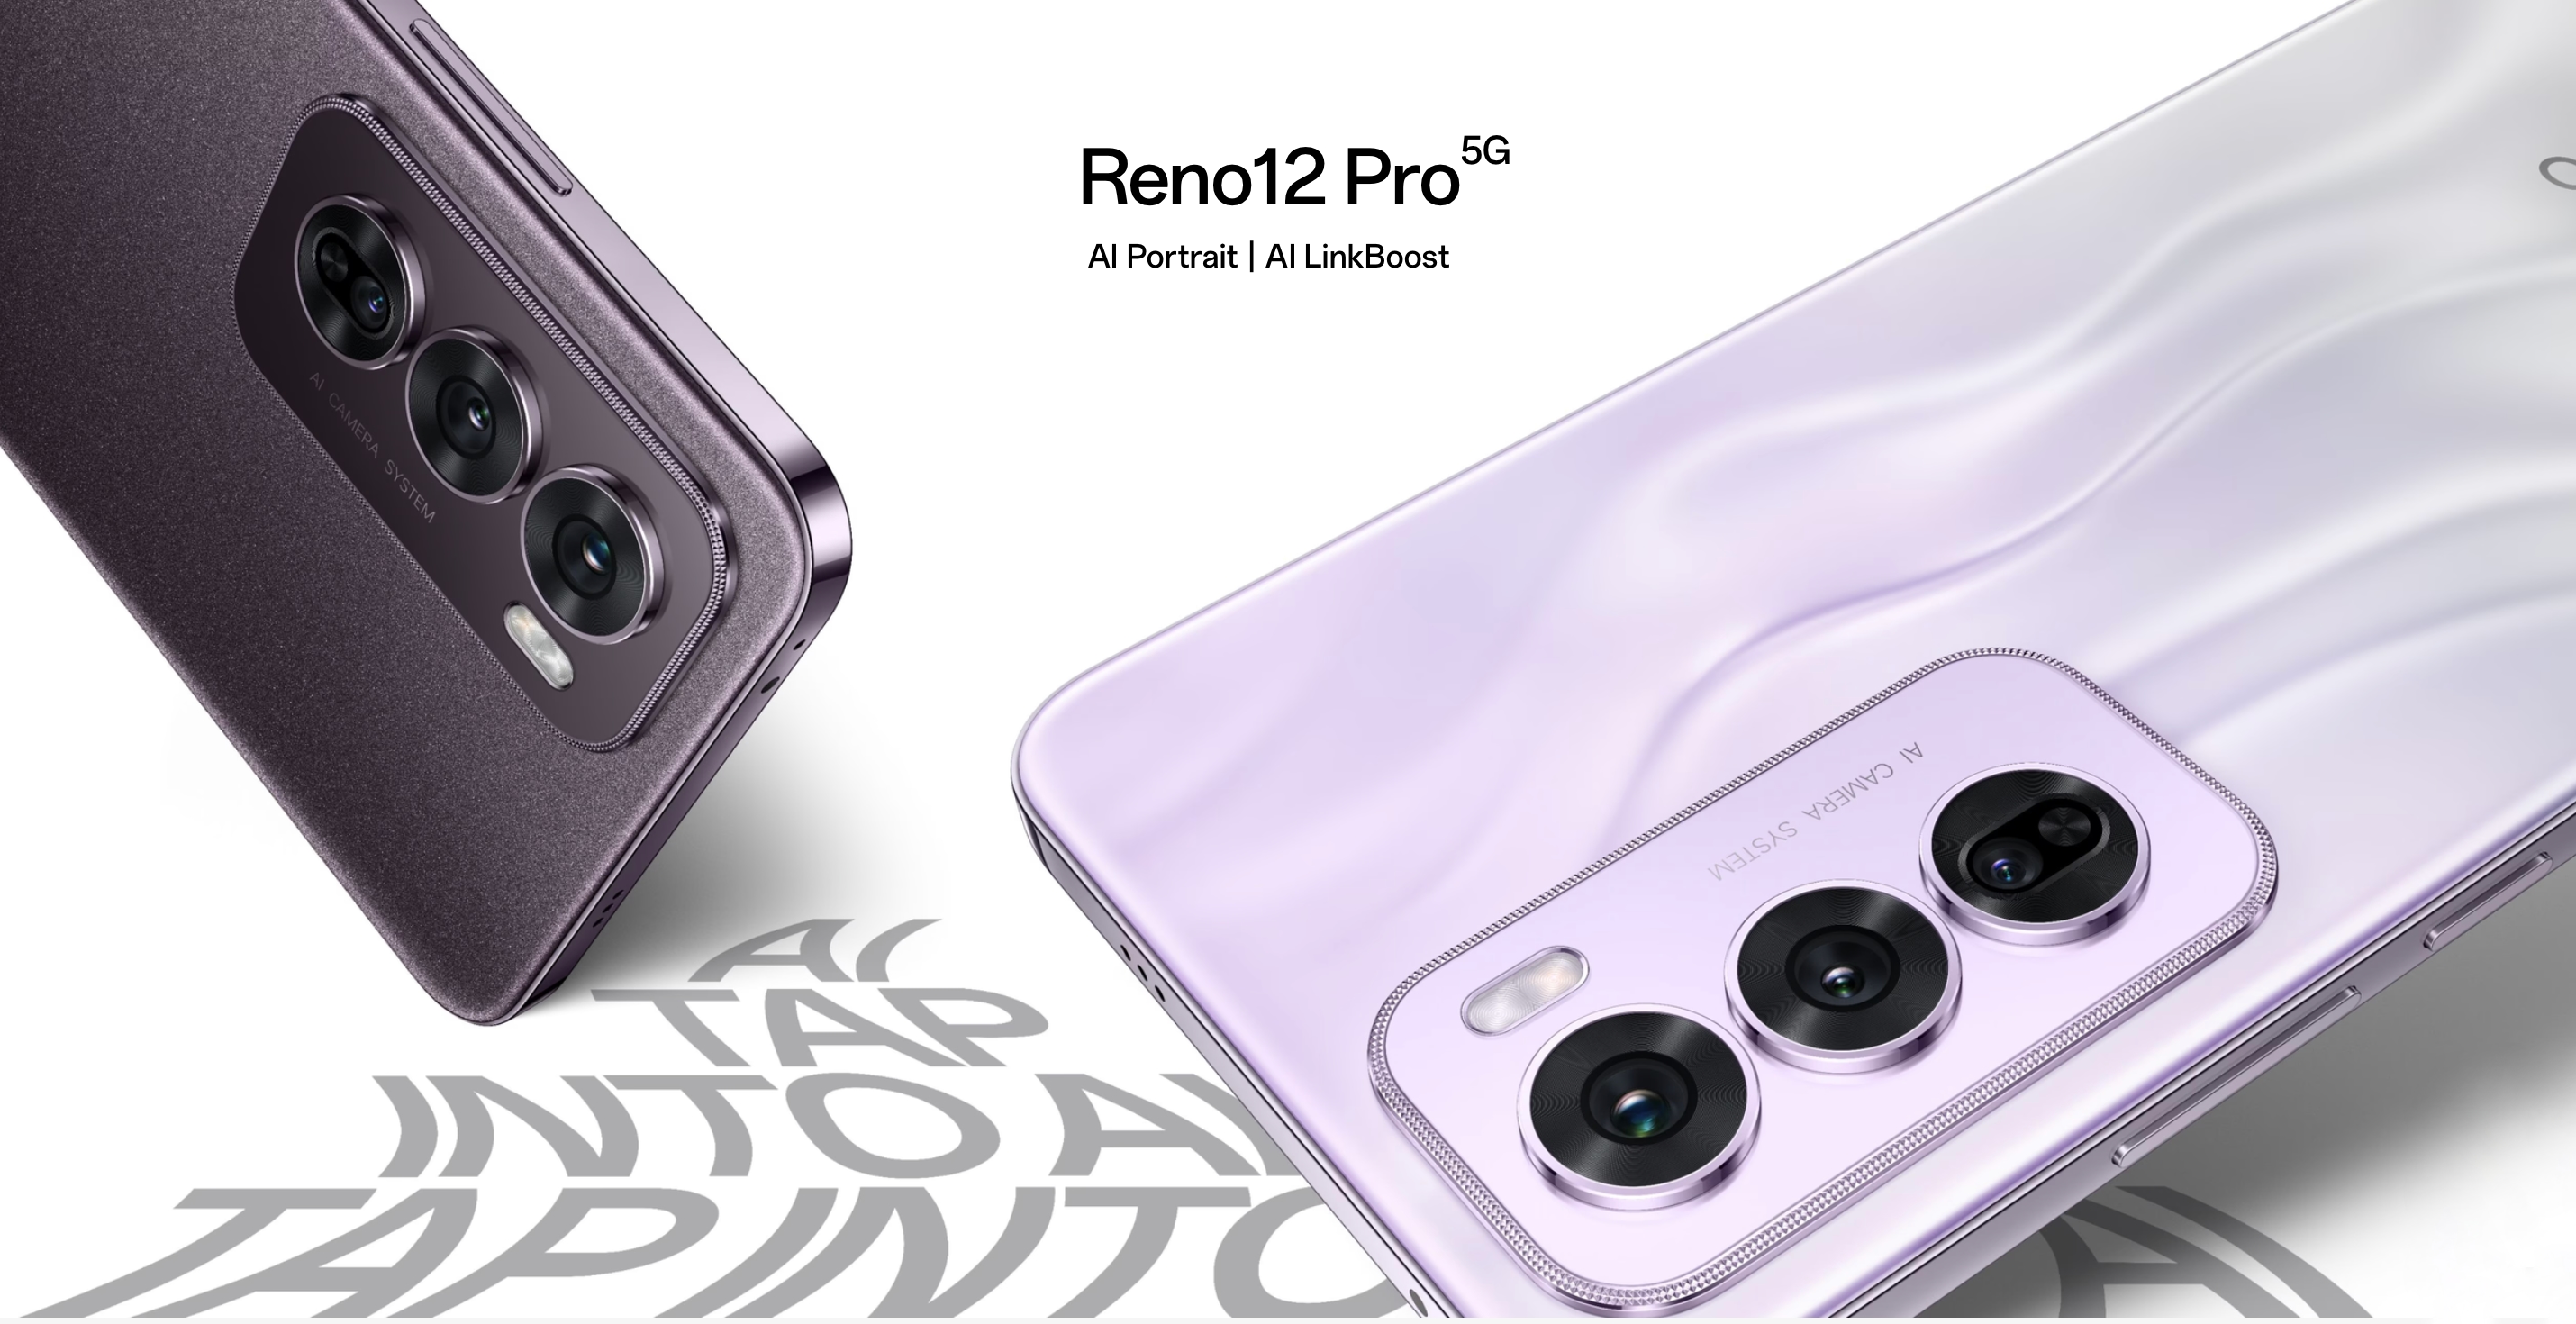 OPPO Reno 12 Pro debuted in Europe: a smartphone with dual 50 MP portrait cameras and a MediaTek Dimensity 7300-Energy chip